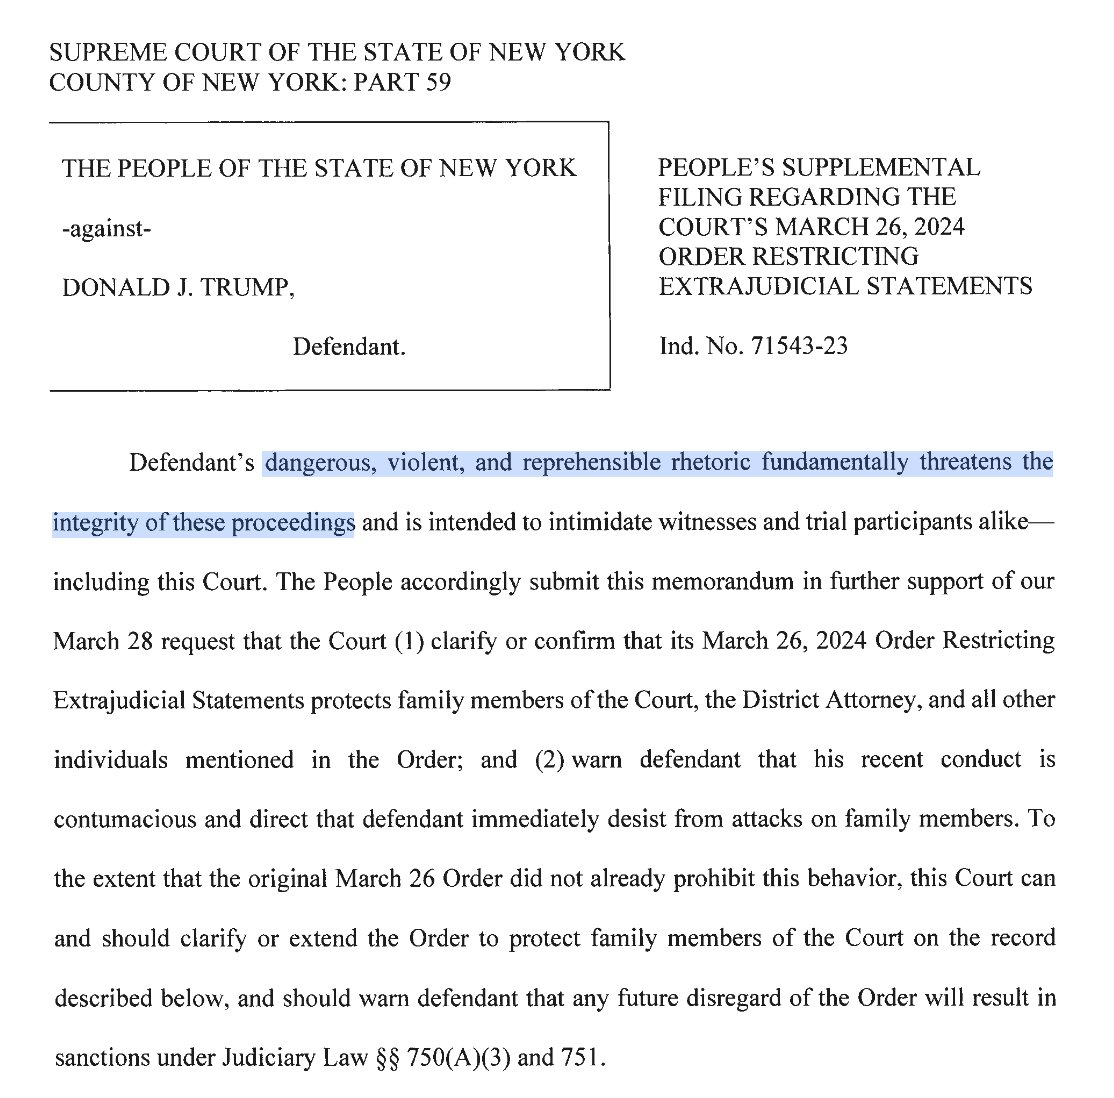 Breaking The Manhattan DA tells the judge that Trump's 'dangerous, violent, and reprehensible rhetoric fundamentally threatens the integrity of these proceedings,' in a new filing urging him to expand the gag order.